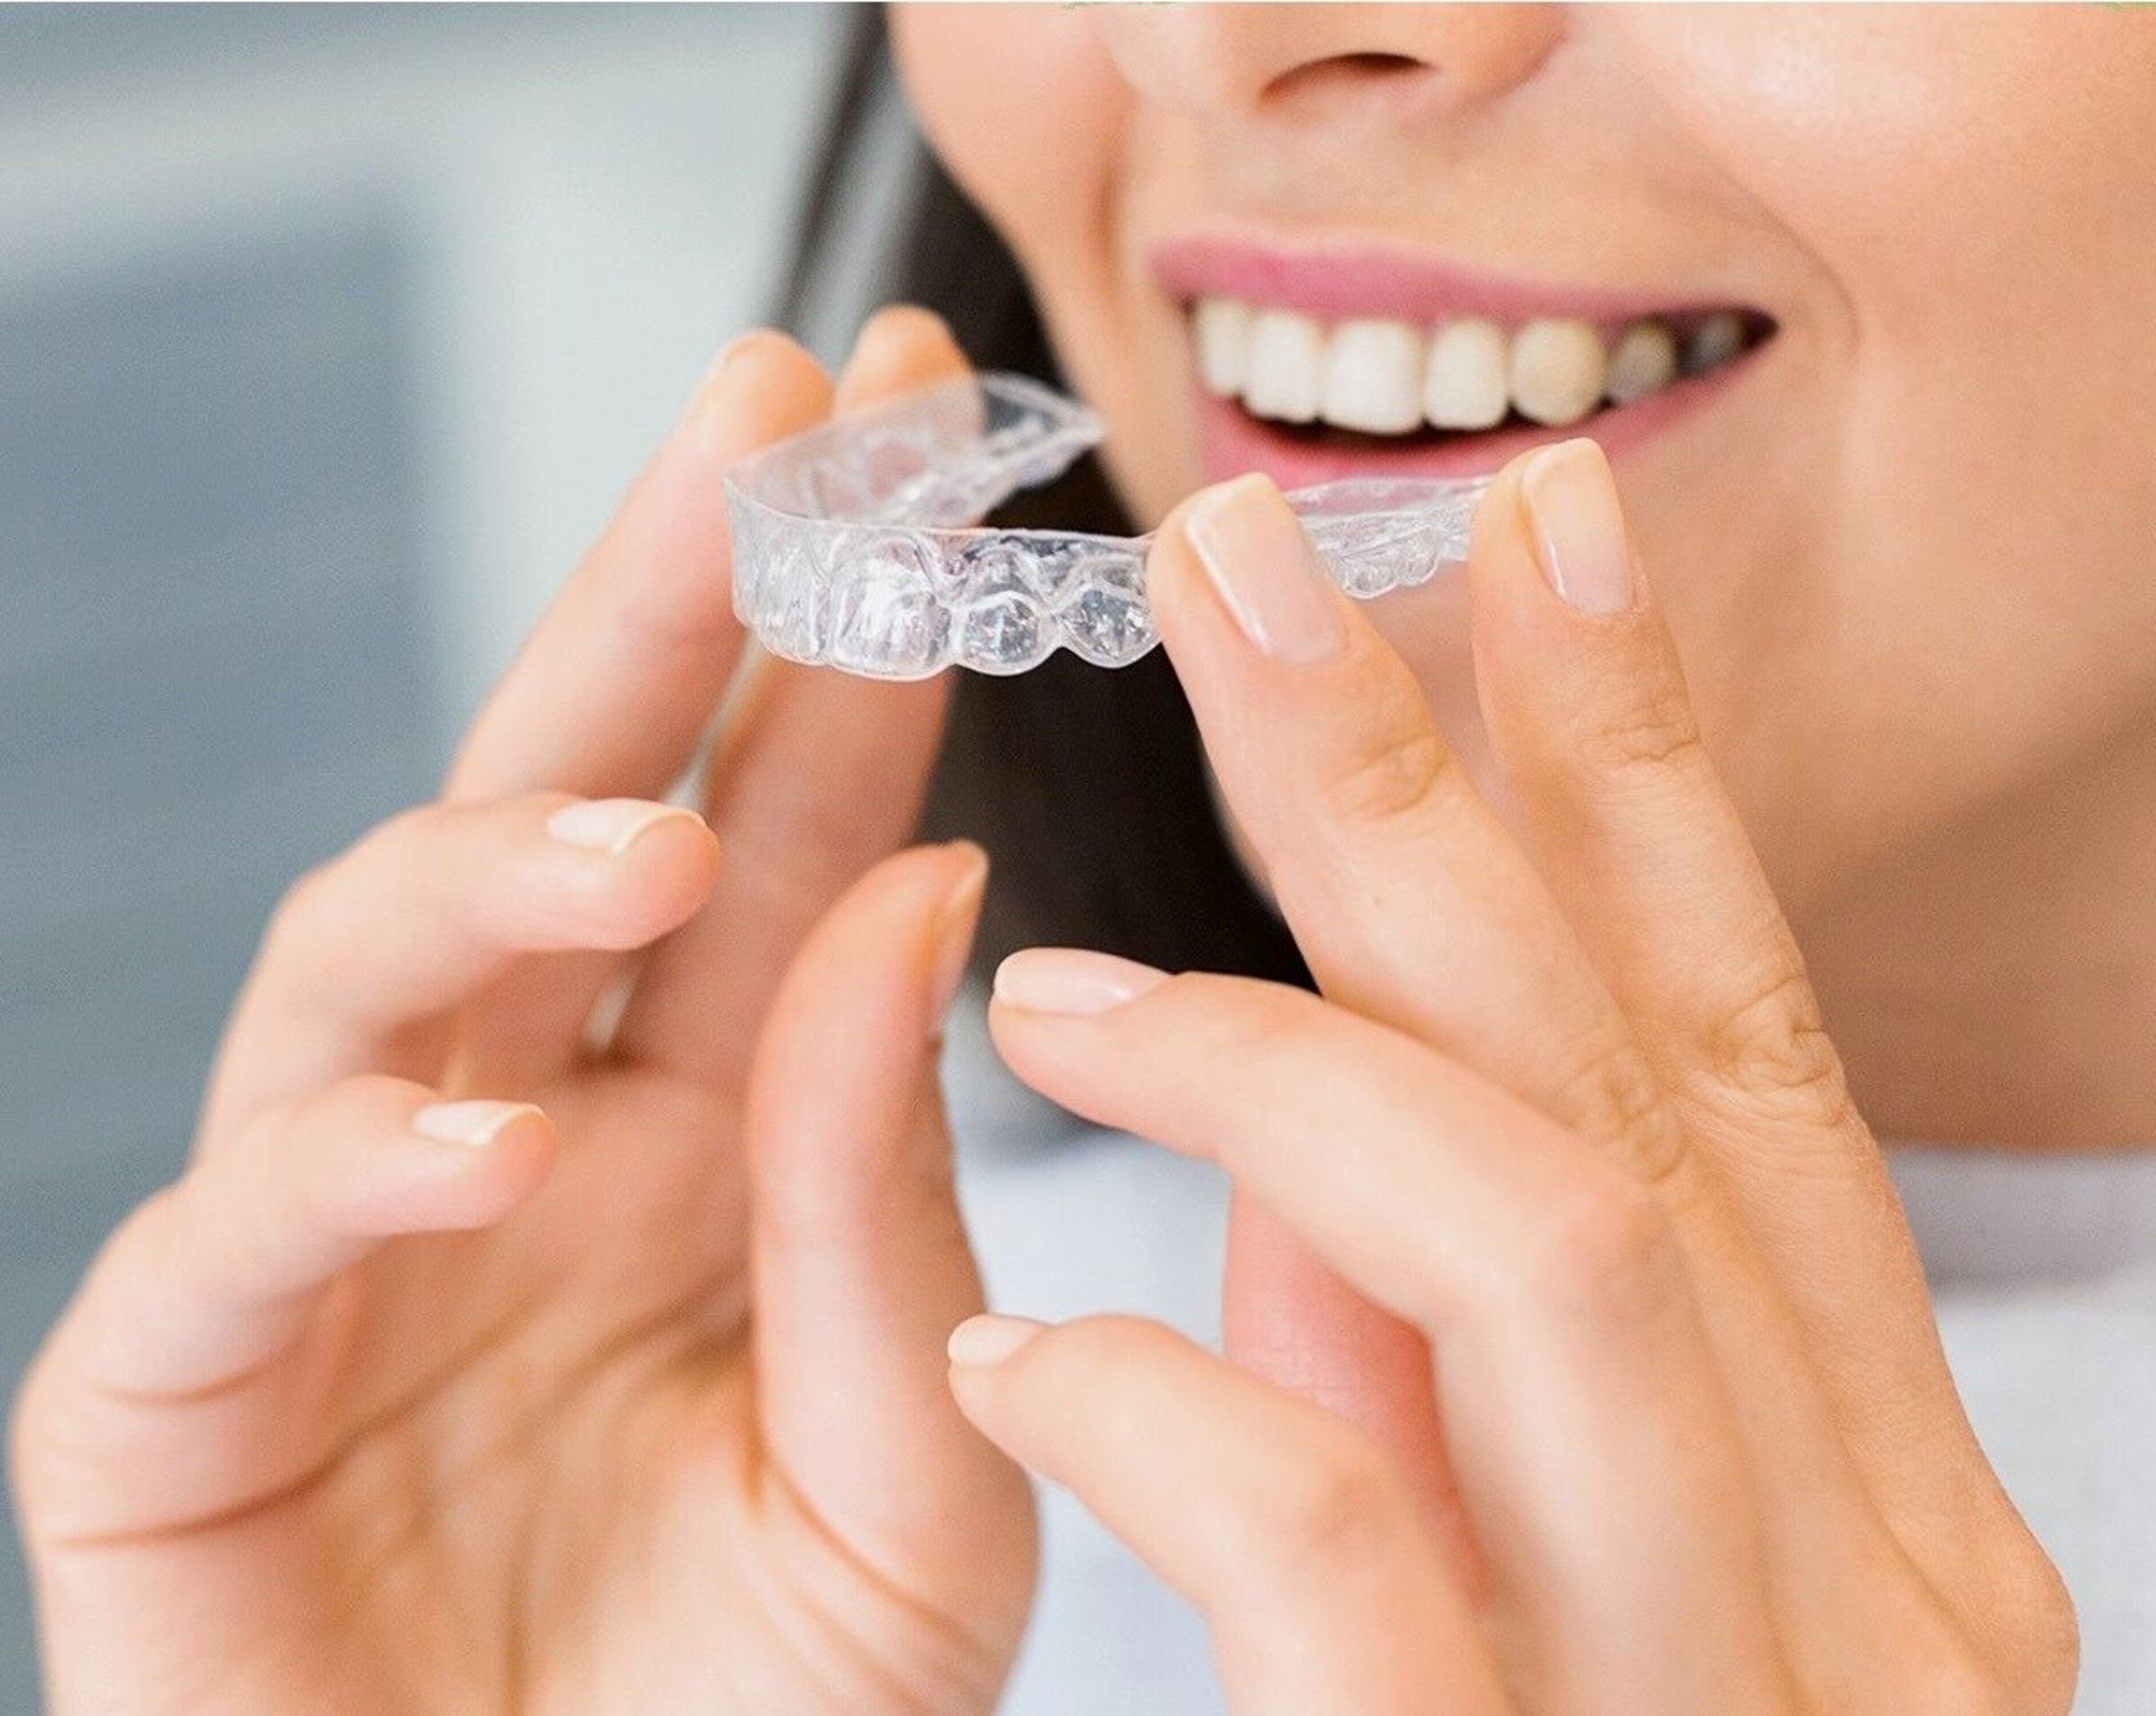 BRACES VS. CLEAR ALIGNERS: WHICH IS BETTER?